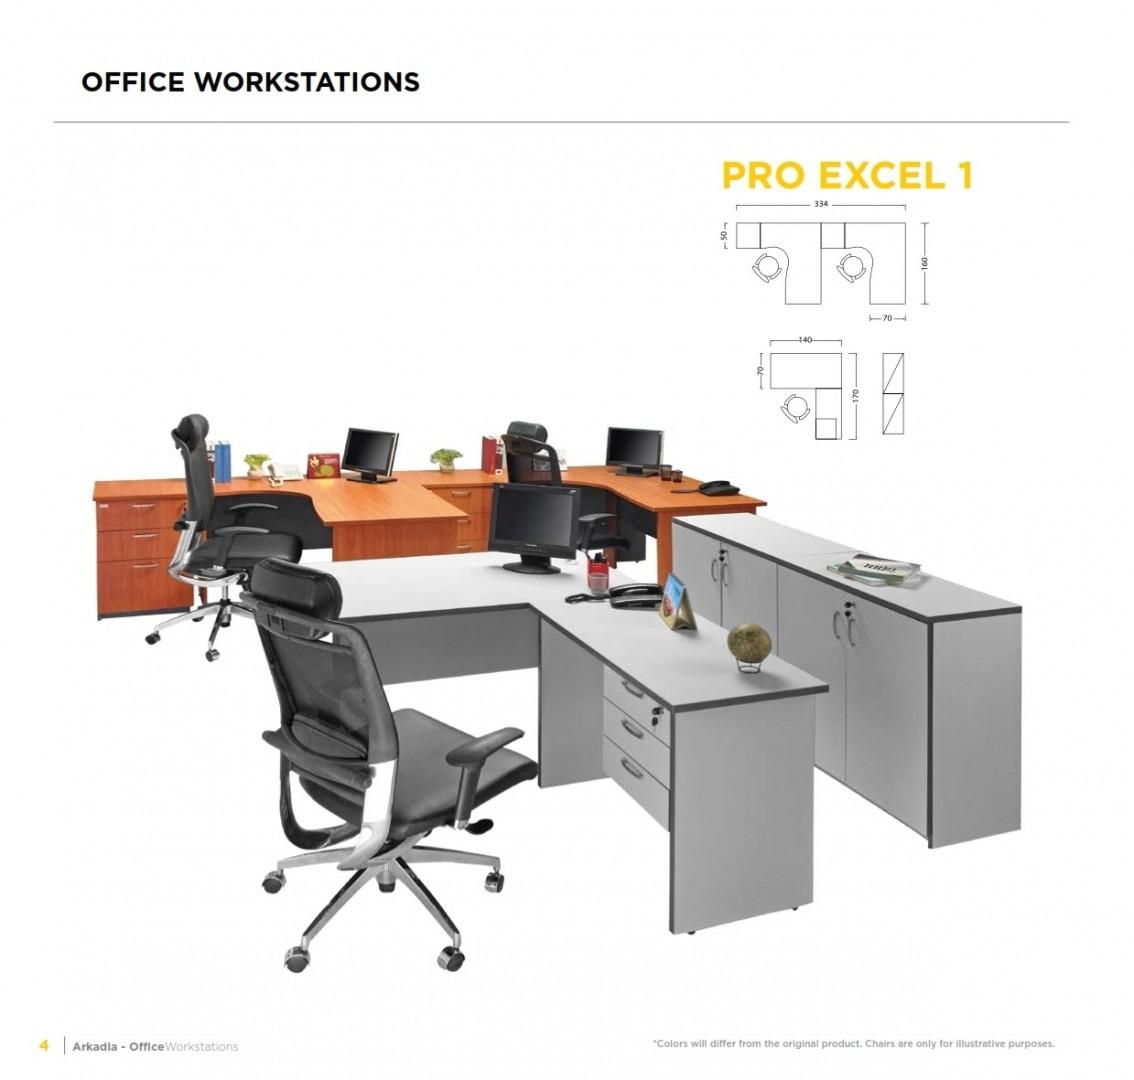 Pro Excel 1 from Arkadia Furniture